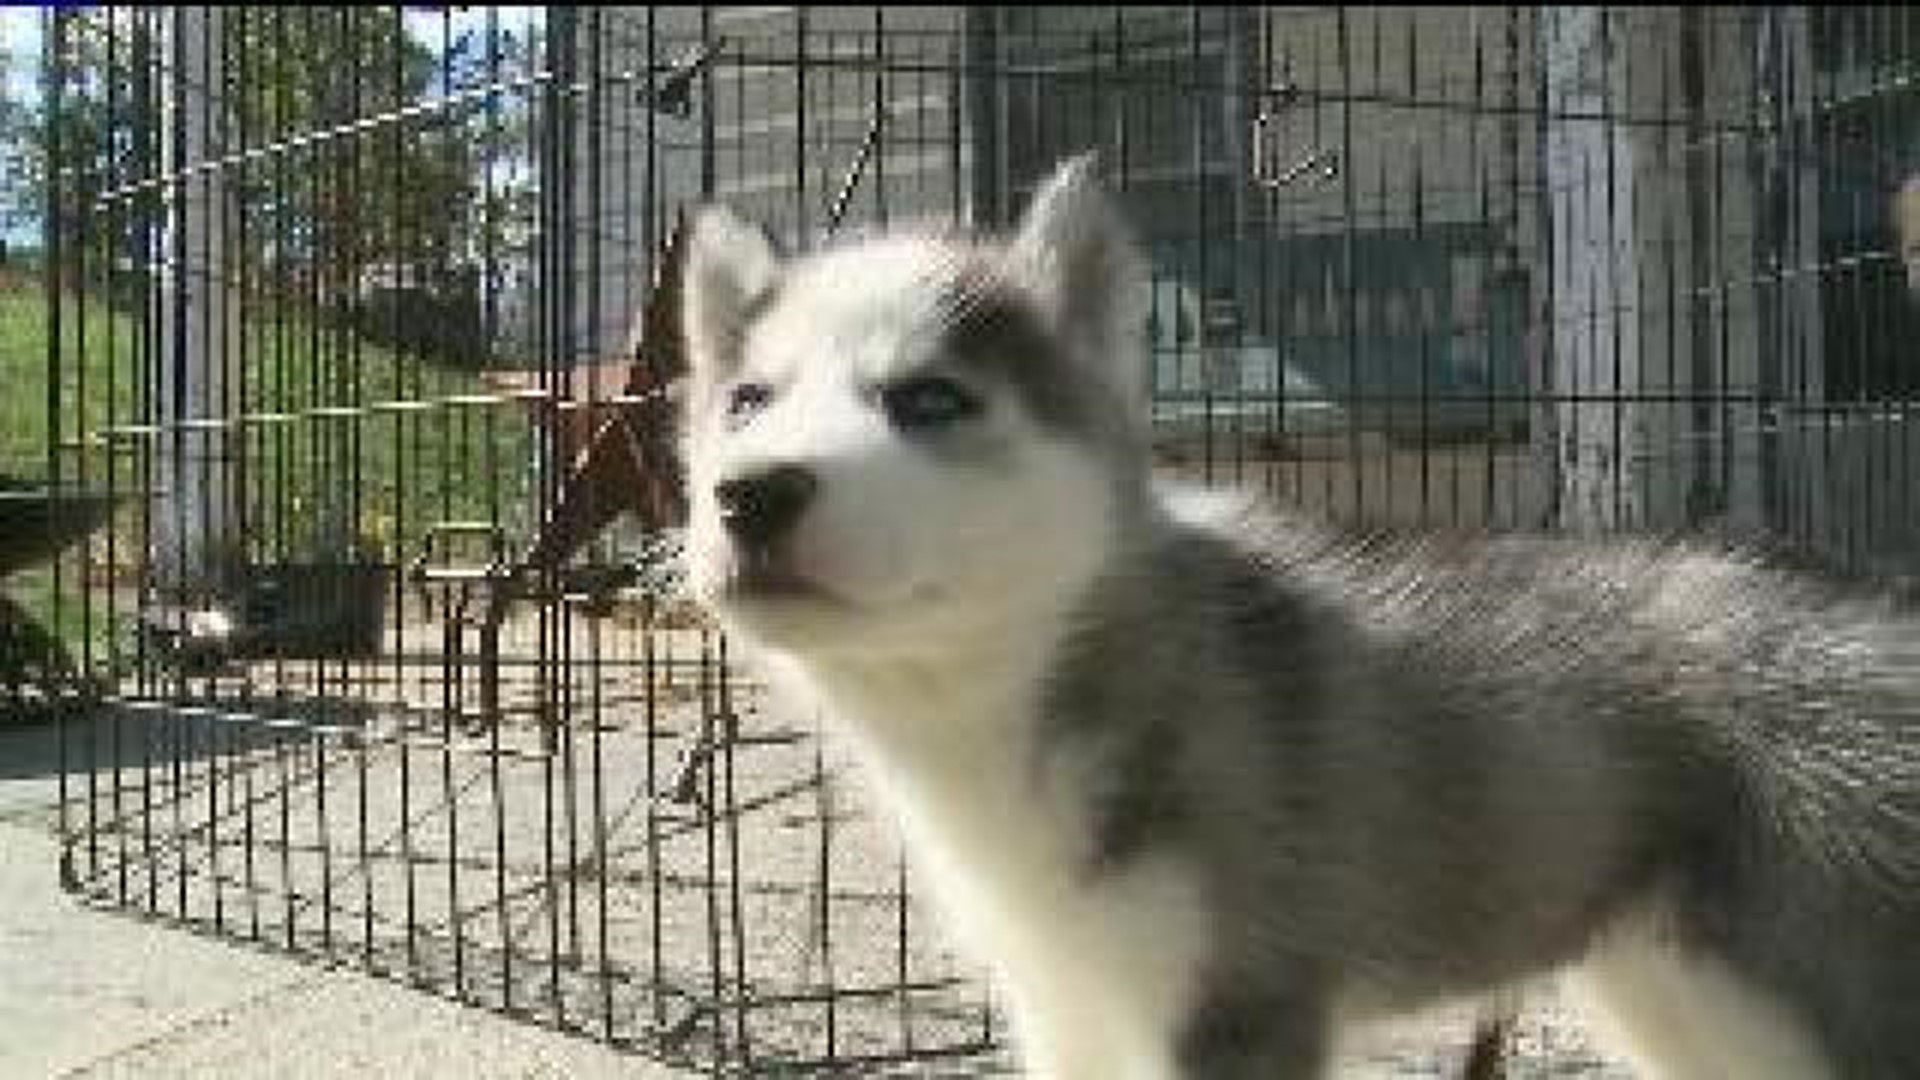 Owners Offering Reward for Stolen Puppies